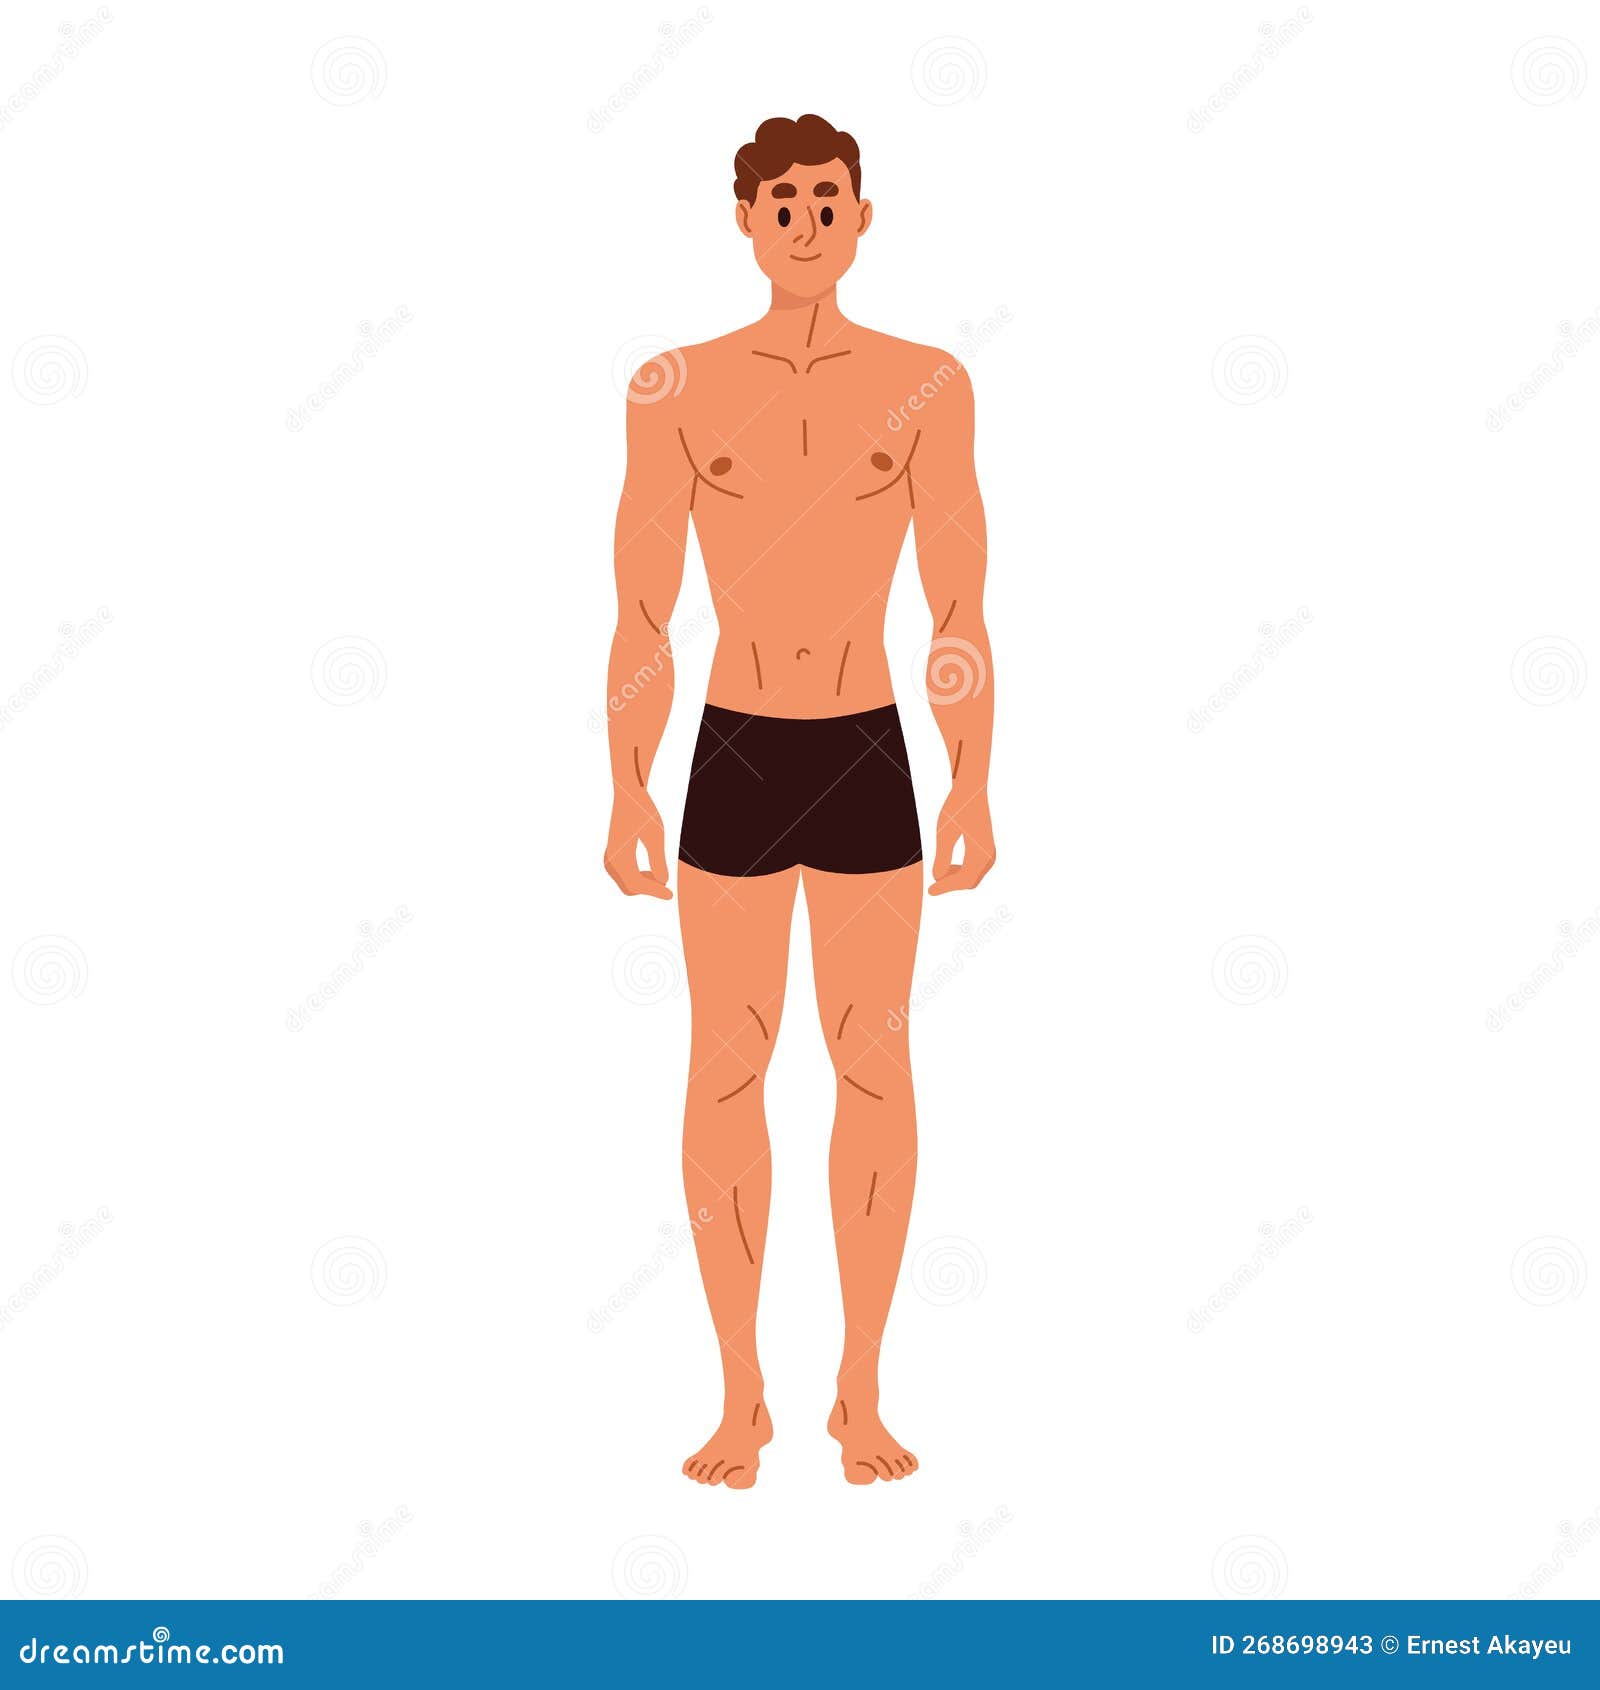 Premium Vector  Male character figure types man with rectangle body shape  stand with arm akimbo person posing in panties and naked torso isolated on  white background cartoon people vector illustration